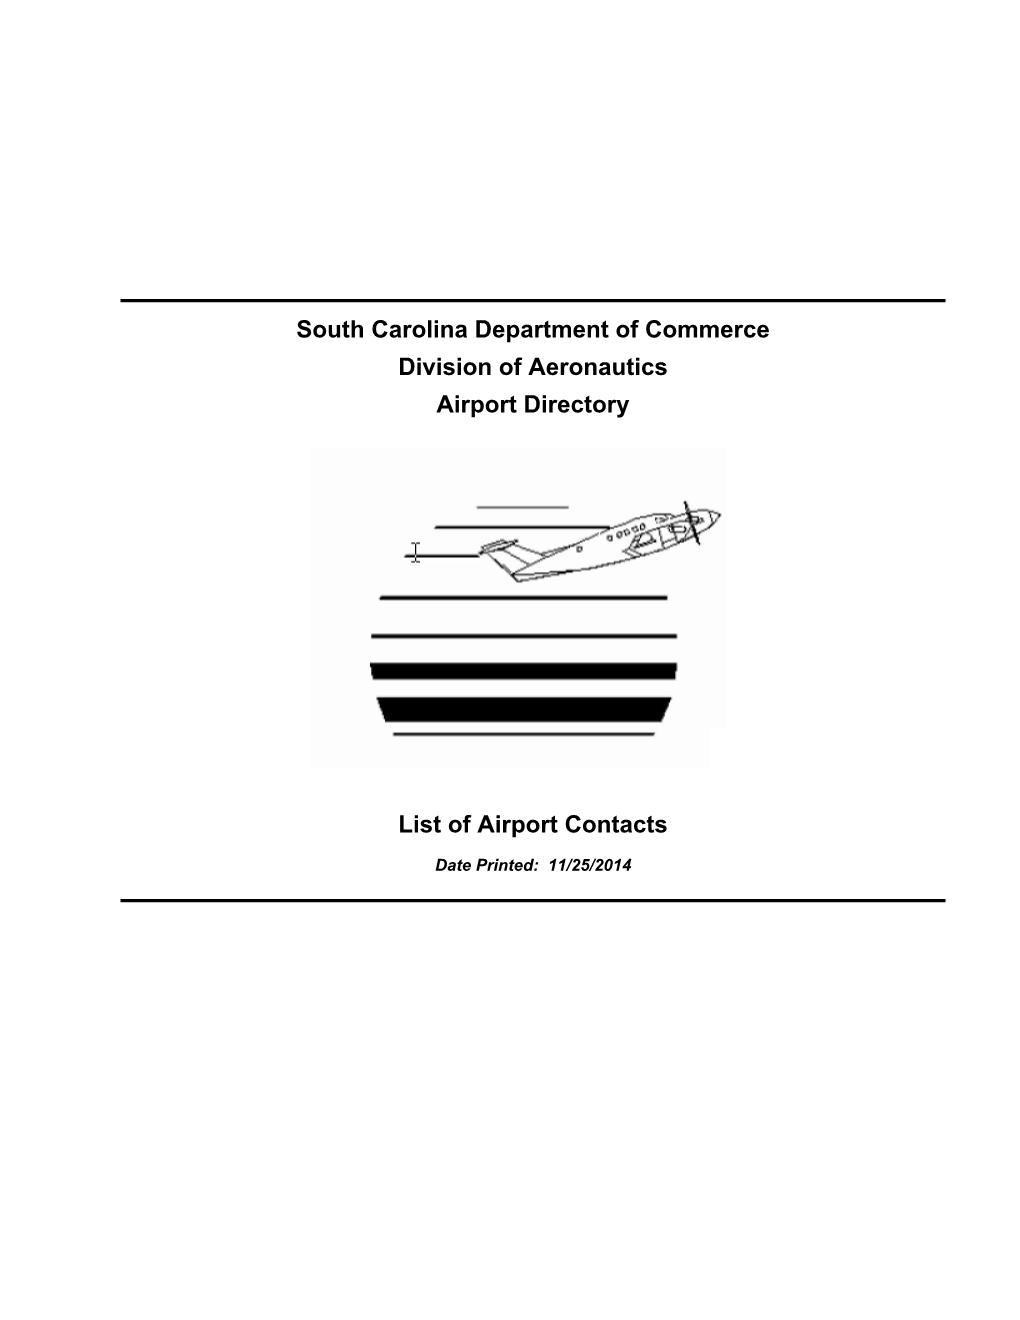 South Carolina Department of Commerce Division of Aeronautics Airport Directory List of Airport Contacts